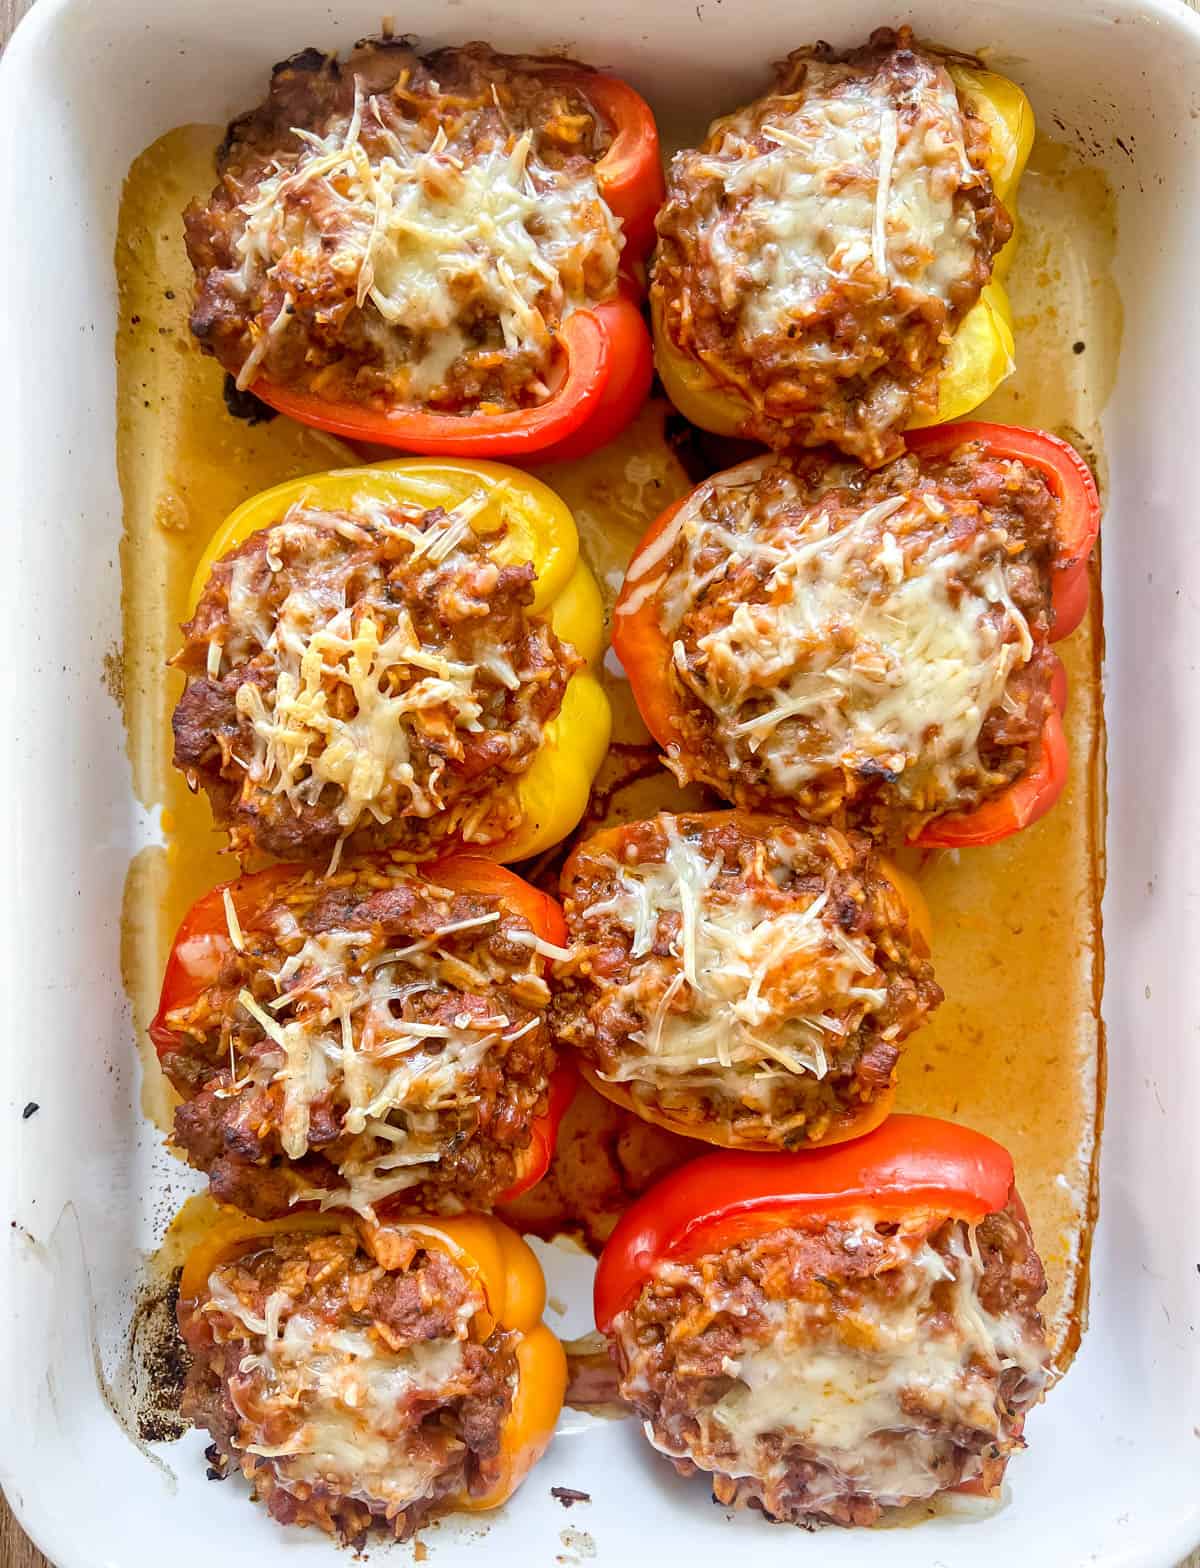 Stuffed peppers recipe with rice and ground beef baked in the oven.